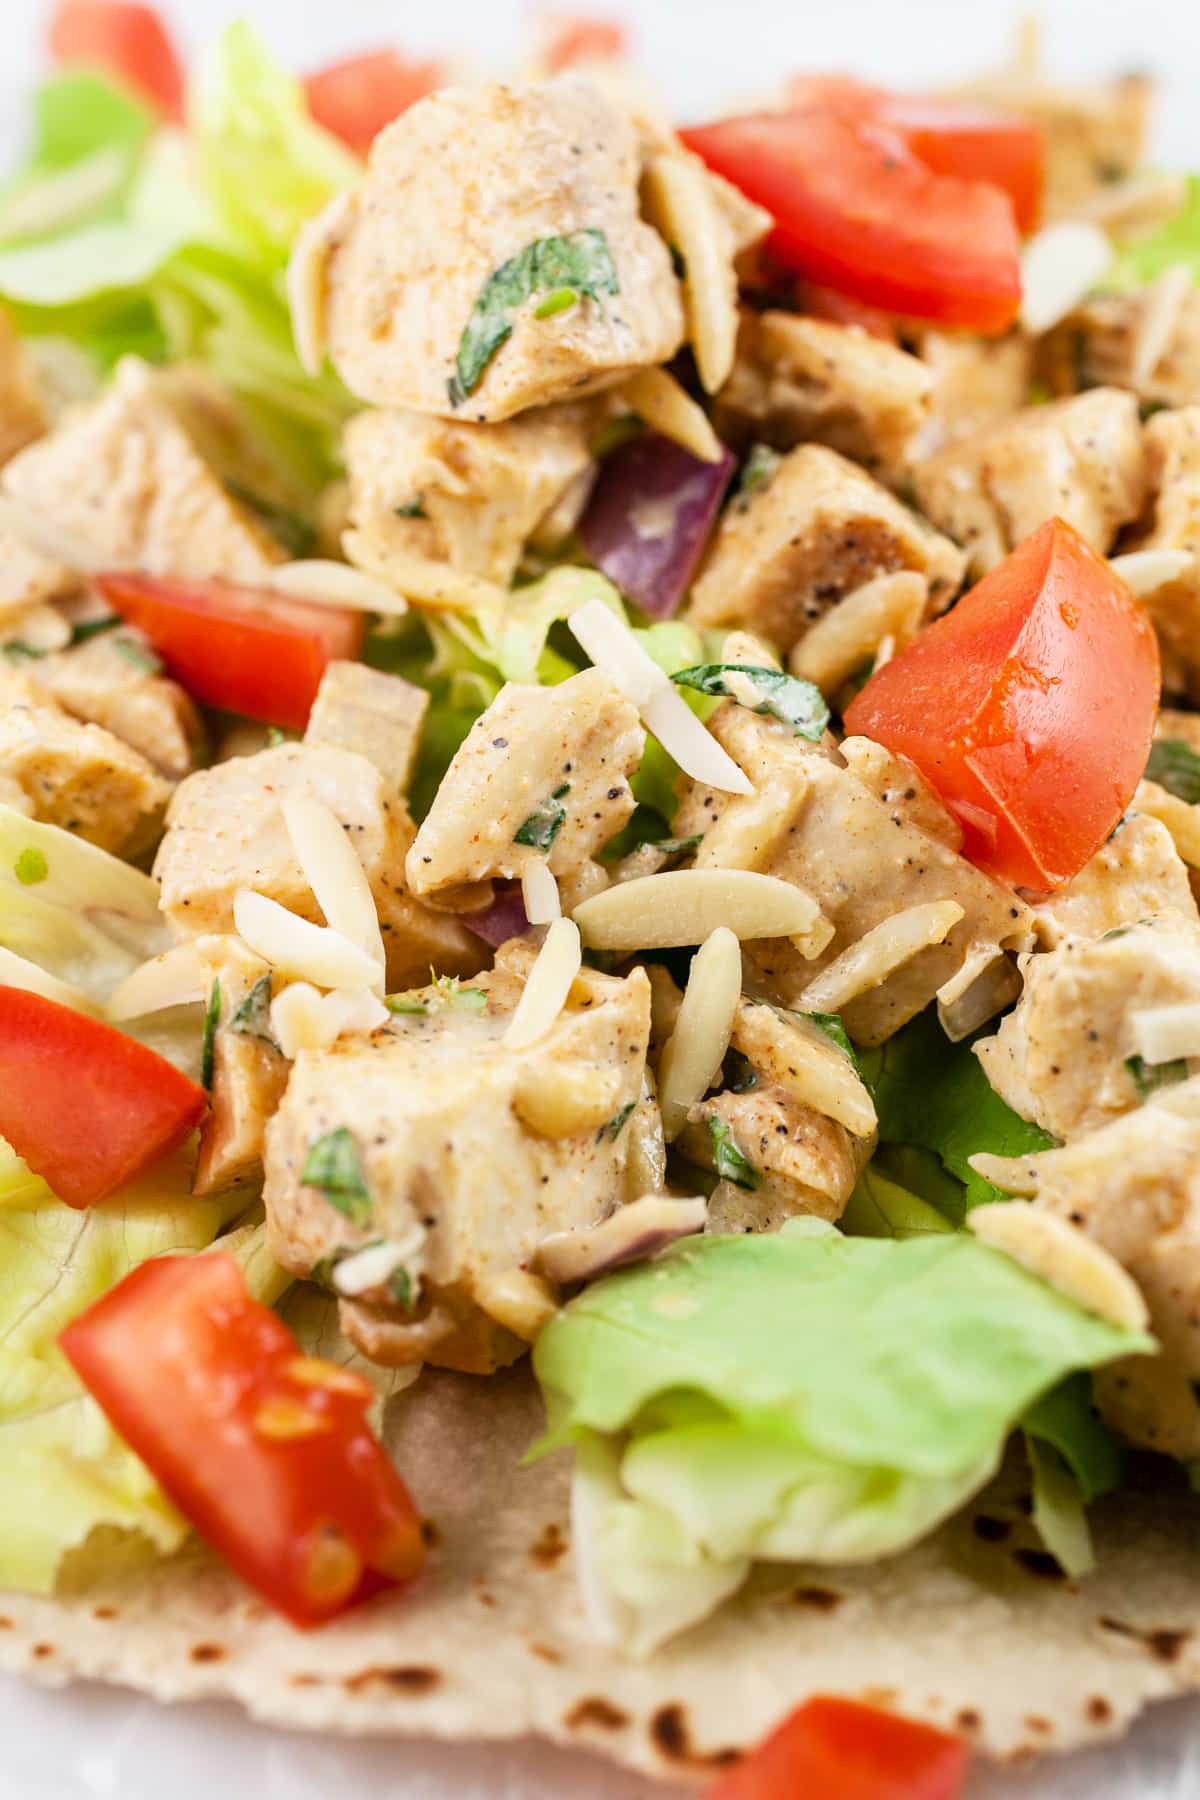 Lemon tarragon chicken salad with slivered almonds, tomatoes, and lettuce on wrap.